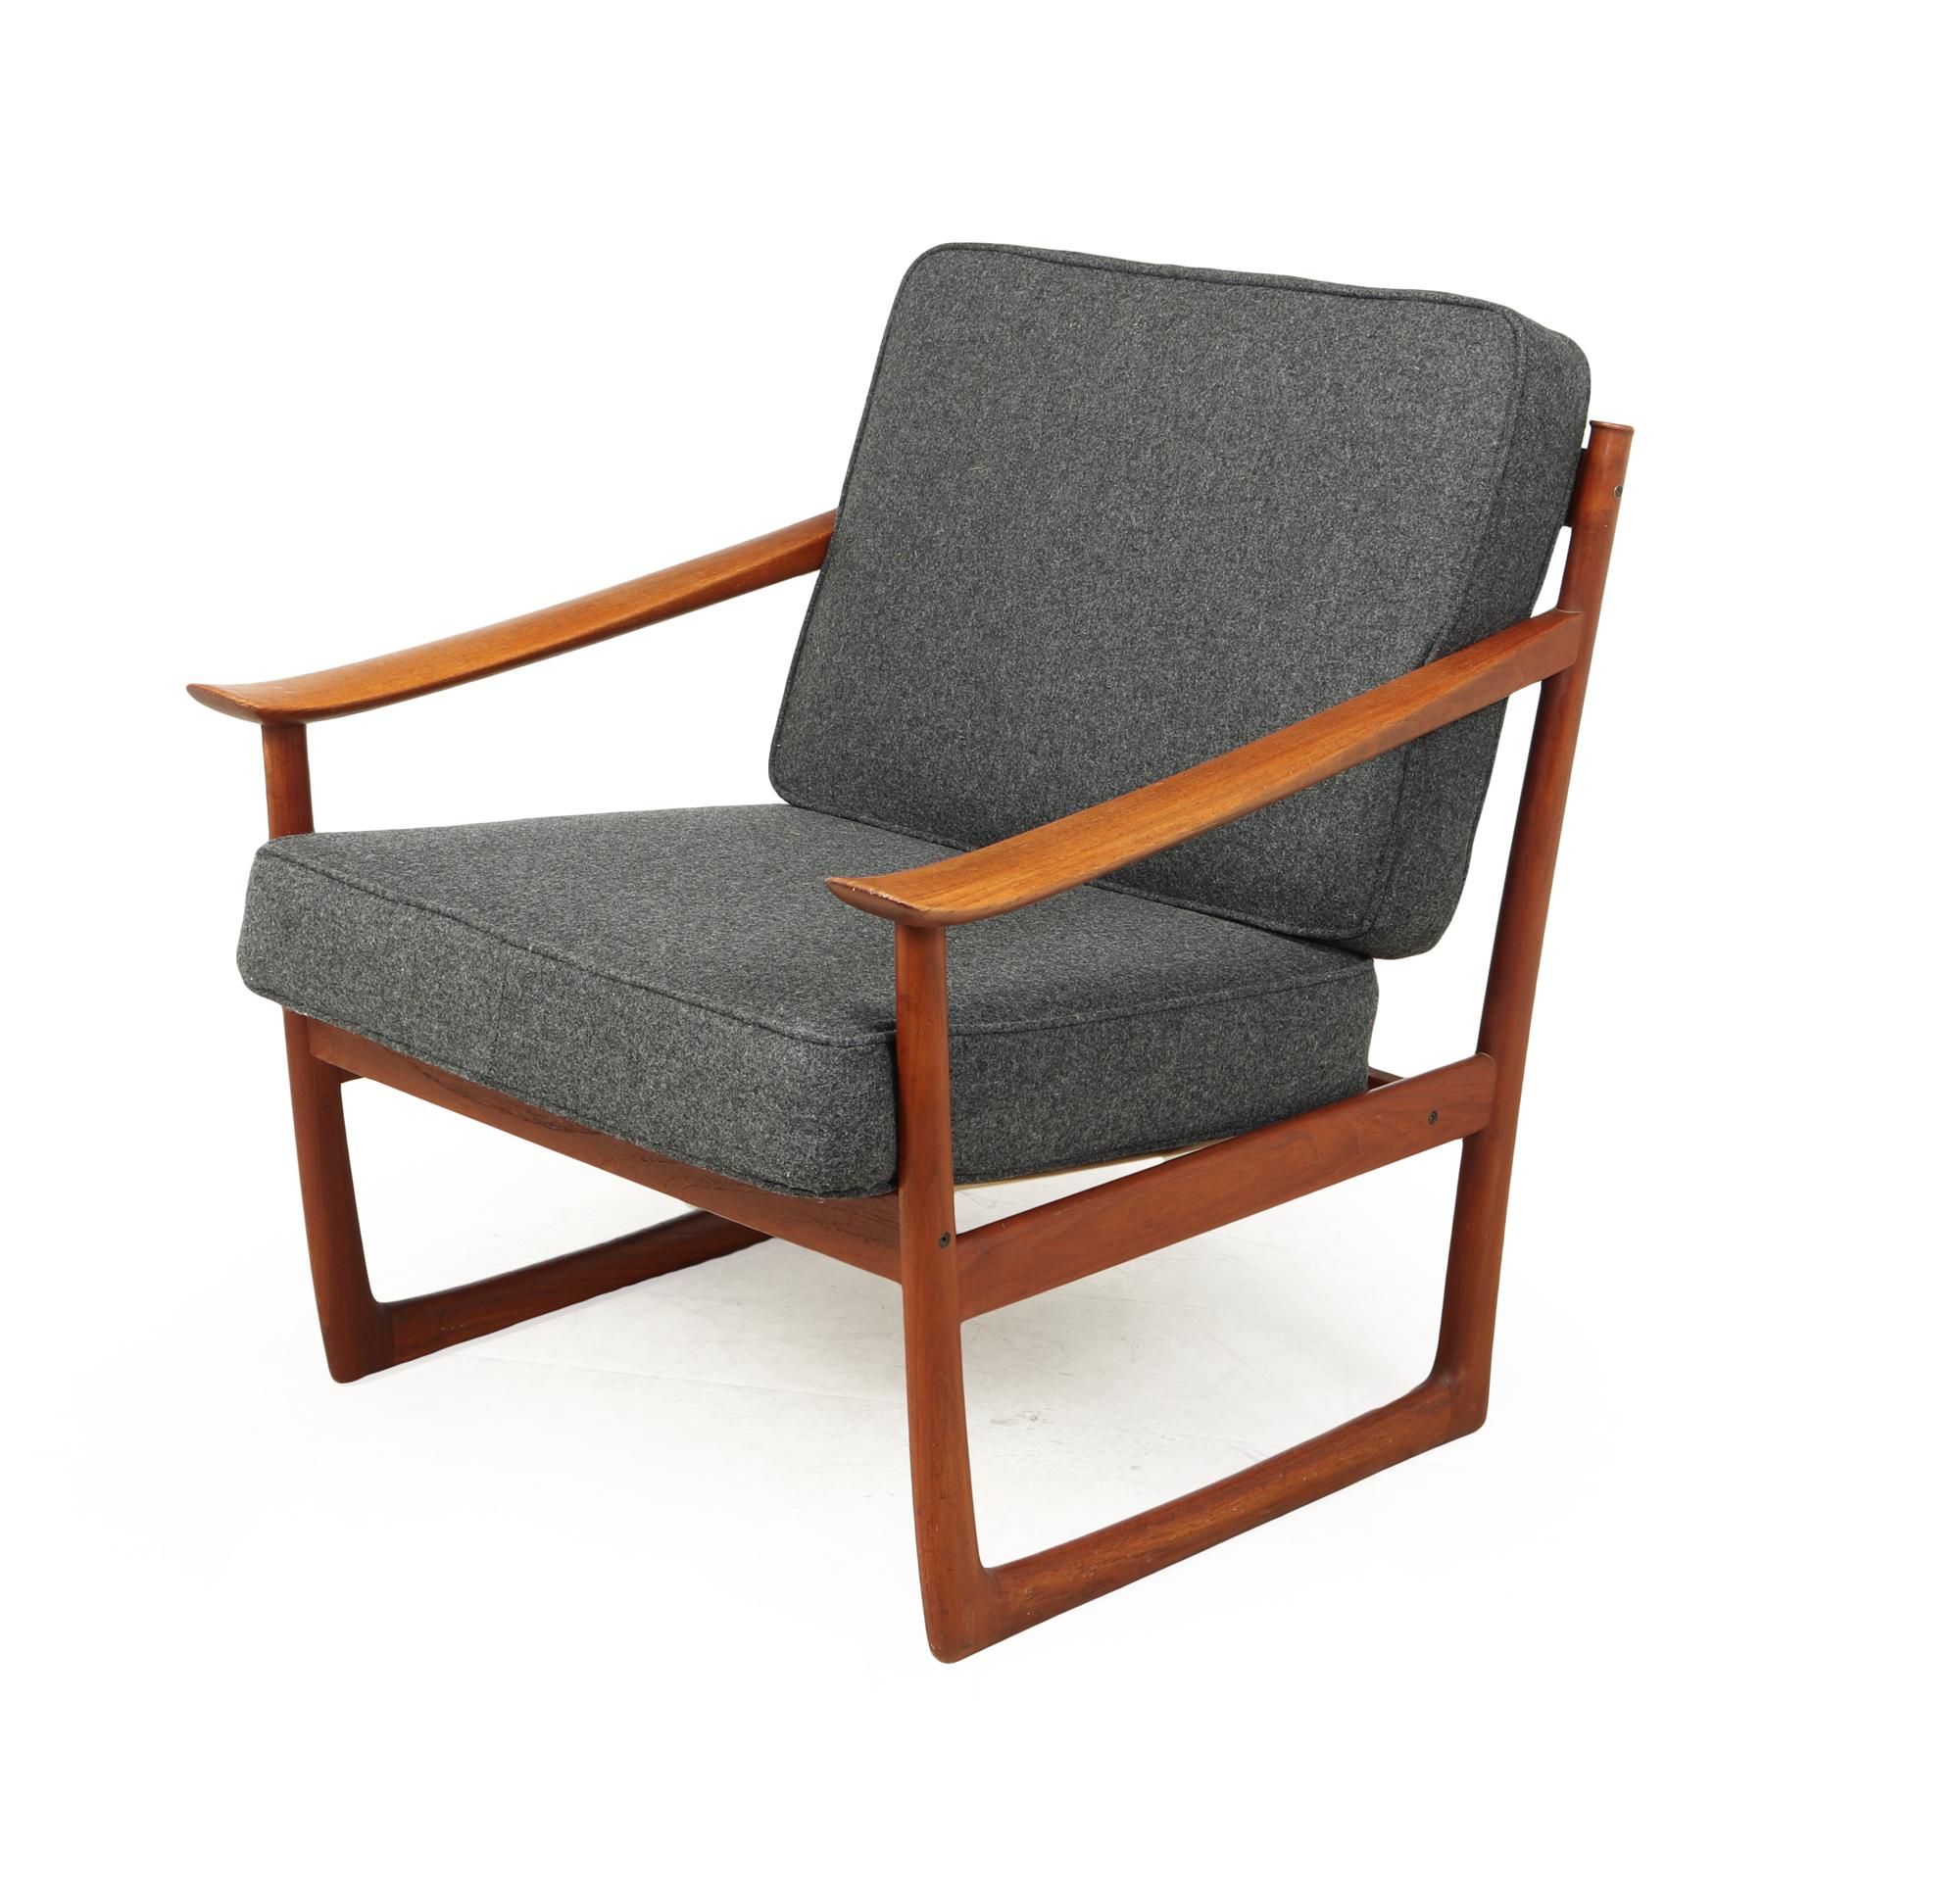 A mid century Danish lounge model 130 chair by Peter Hvidt & Orla Mølgaard, produced in Solid teak and upholstered in 100% wool fabric. Designed in 1961. This chair was produced by France and Son in the 1960’s and is in exceptional original